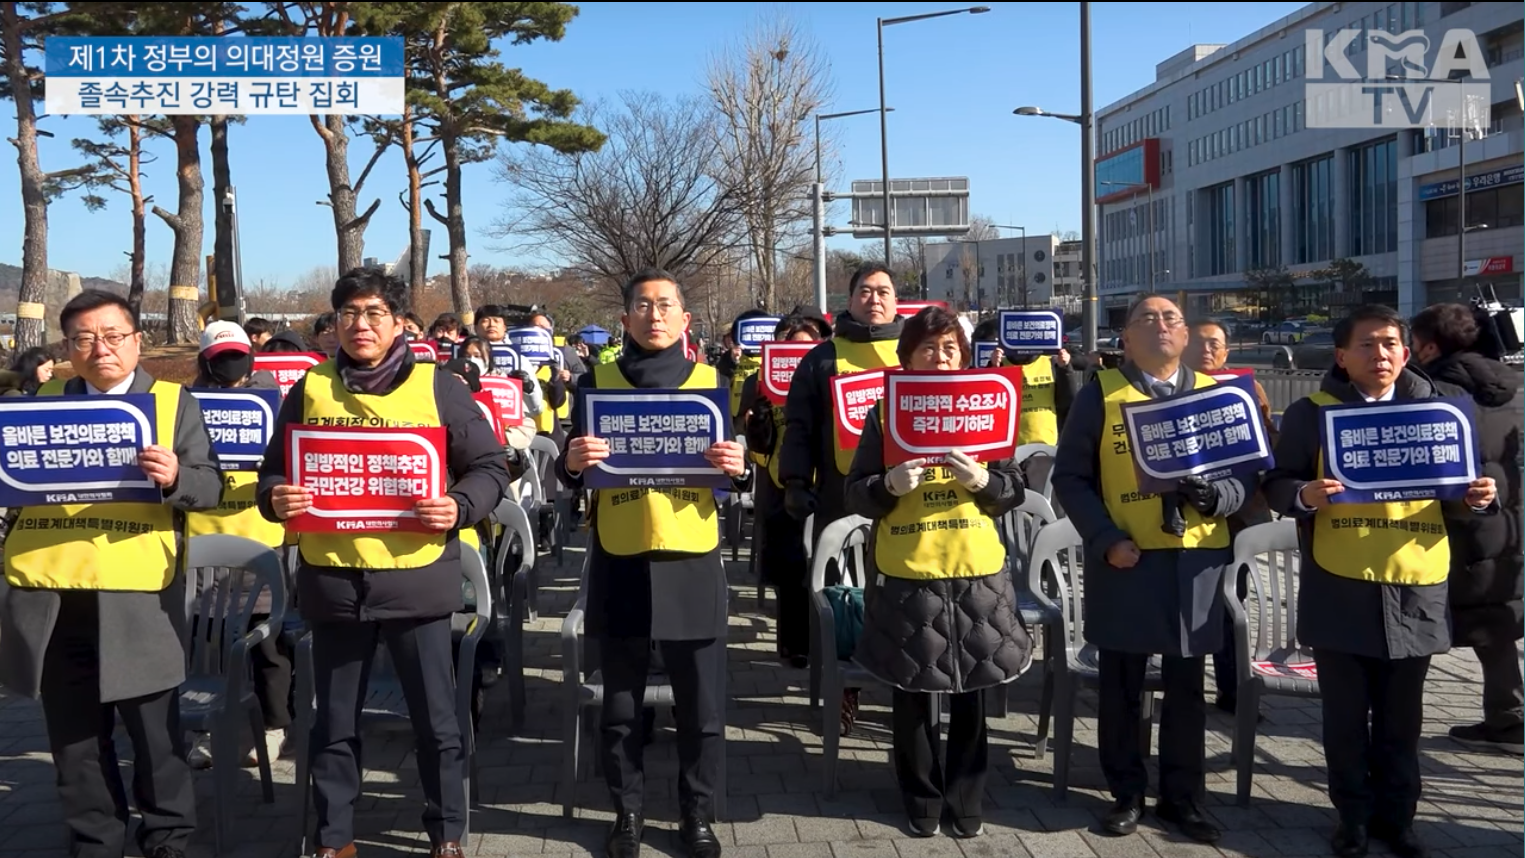 Group of people wearing yellow vests holding protest signs in Korean.